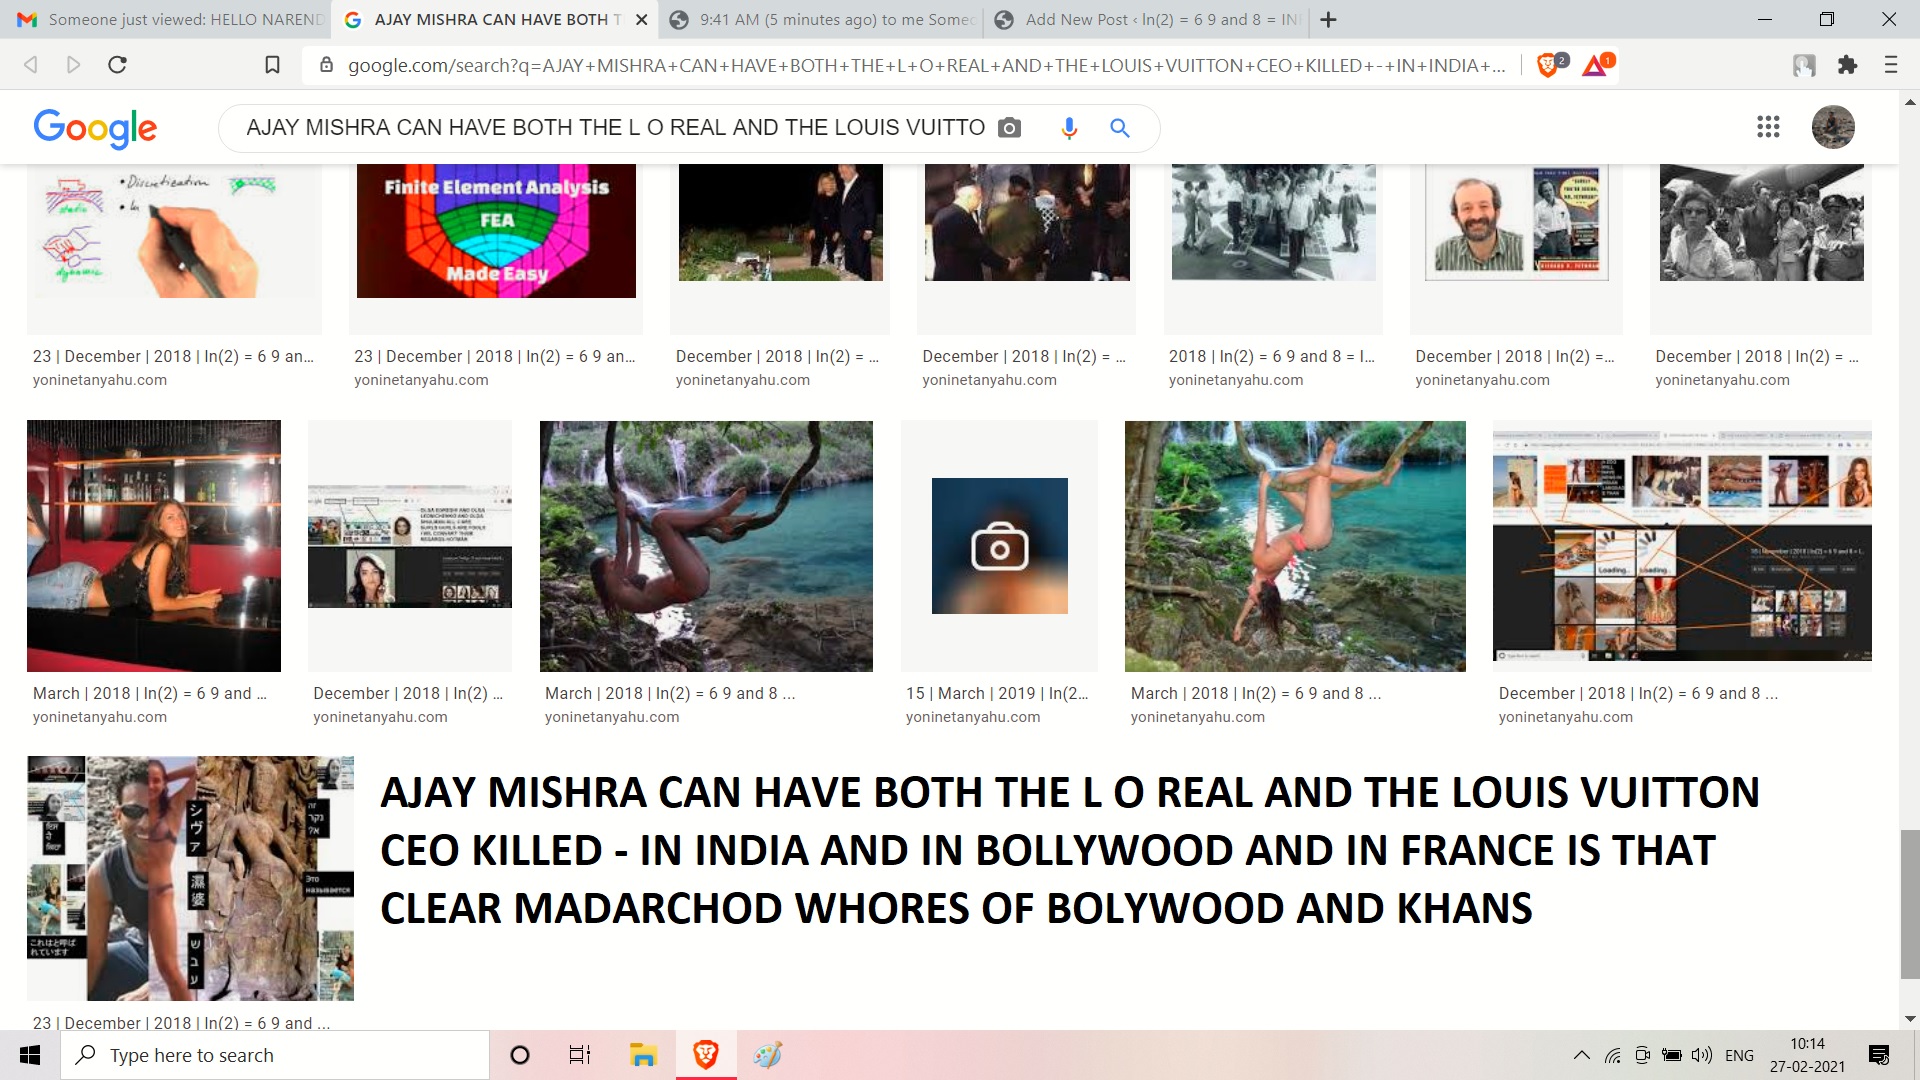 AJAY MISHRA CAN HAVE BOTH THE L O REAL AND THE LOUIS VUITTON CEO KILLED - IN INDIA AND IN BOLLYWOOD AND IN FRANCE IS THAT CLEAR MADARCHOD WHORES OF BOLYWOOD AND KHANS